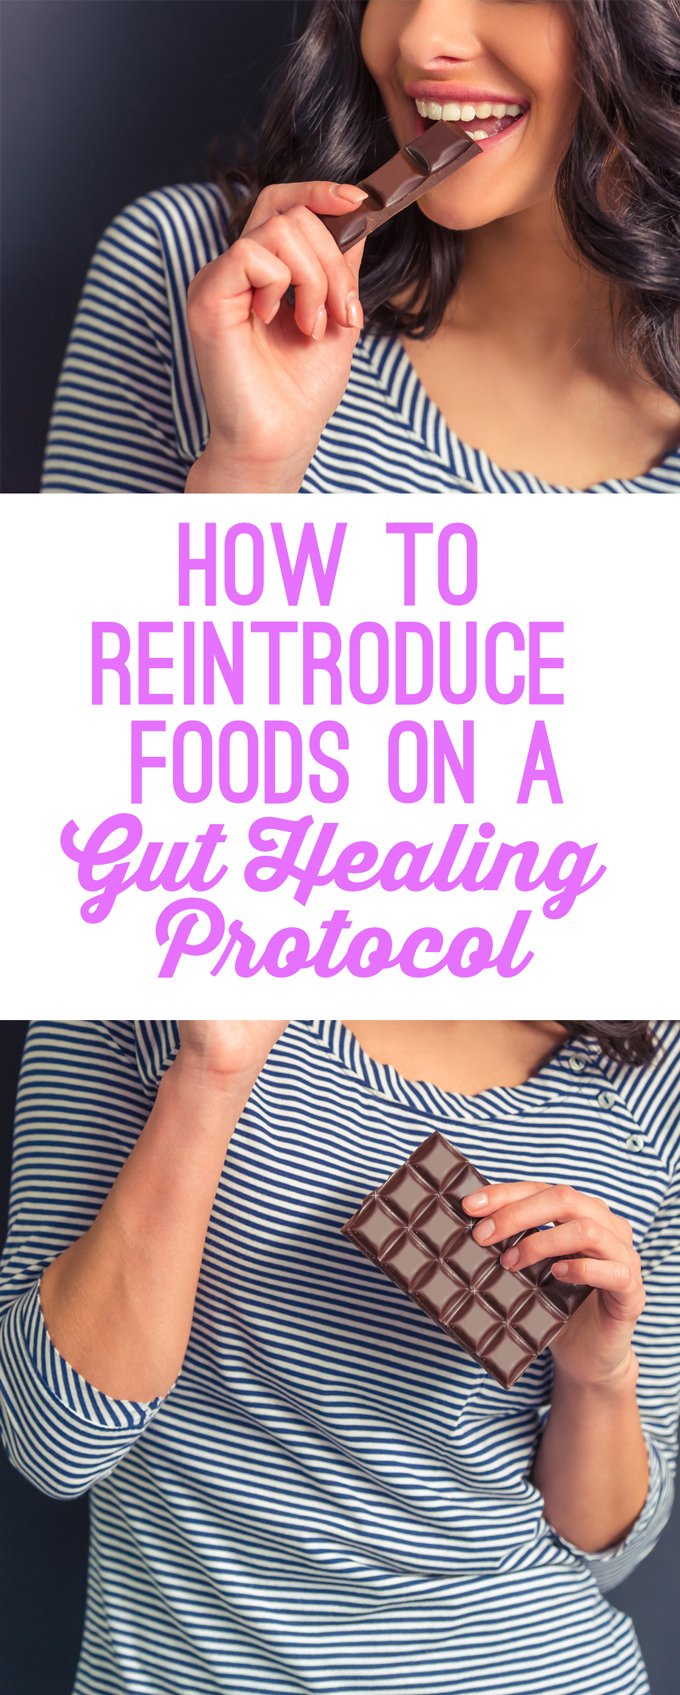 How To Reintroduce Foods On a Gut Healing Protocol